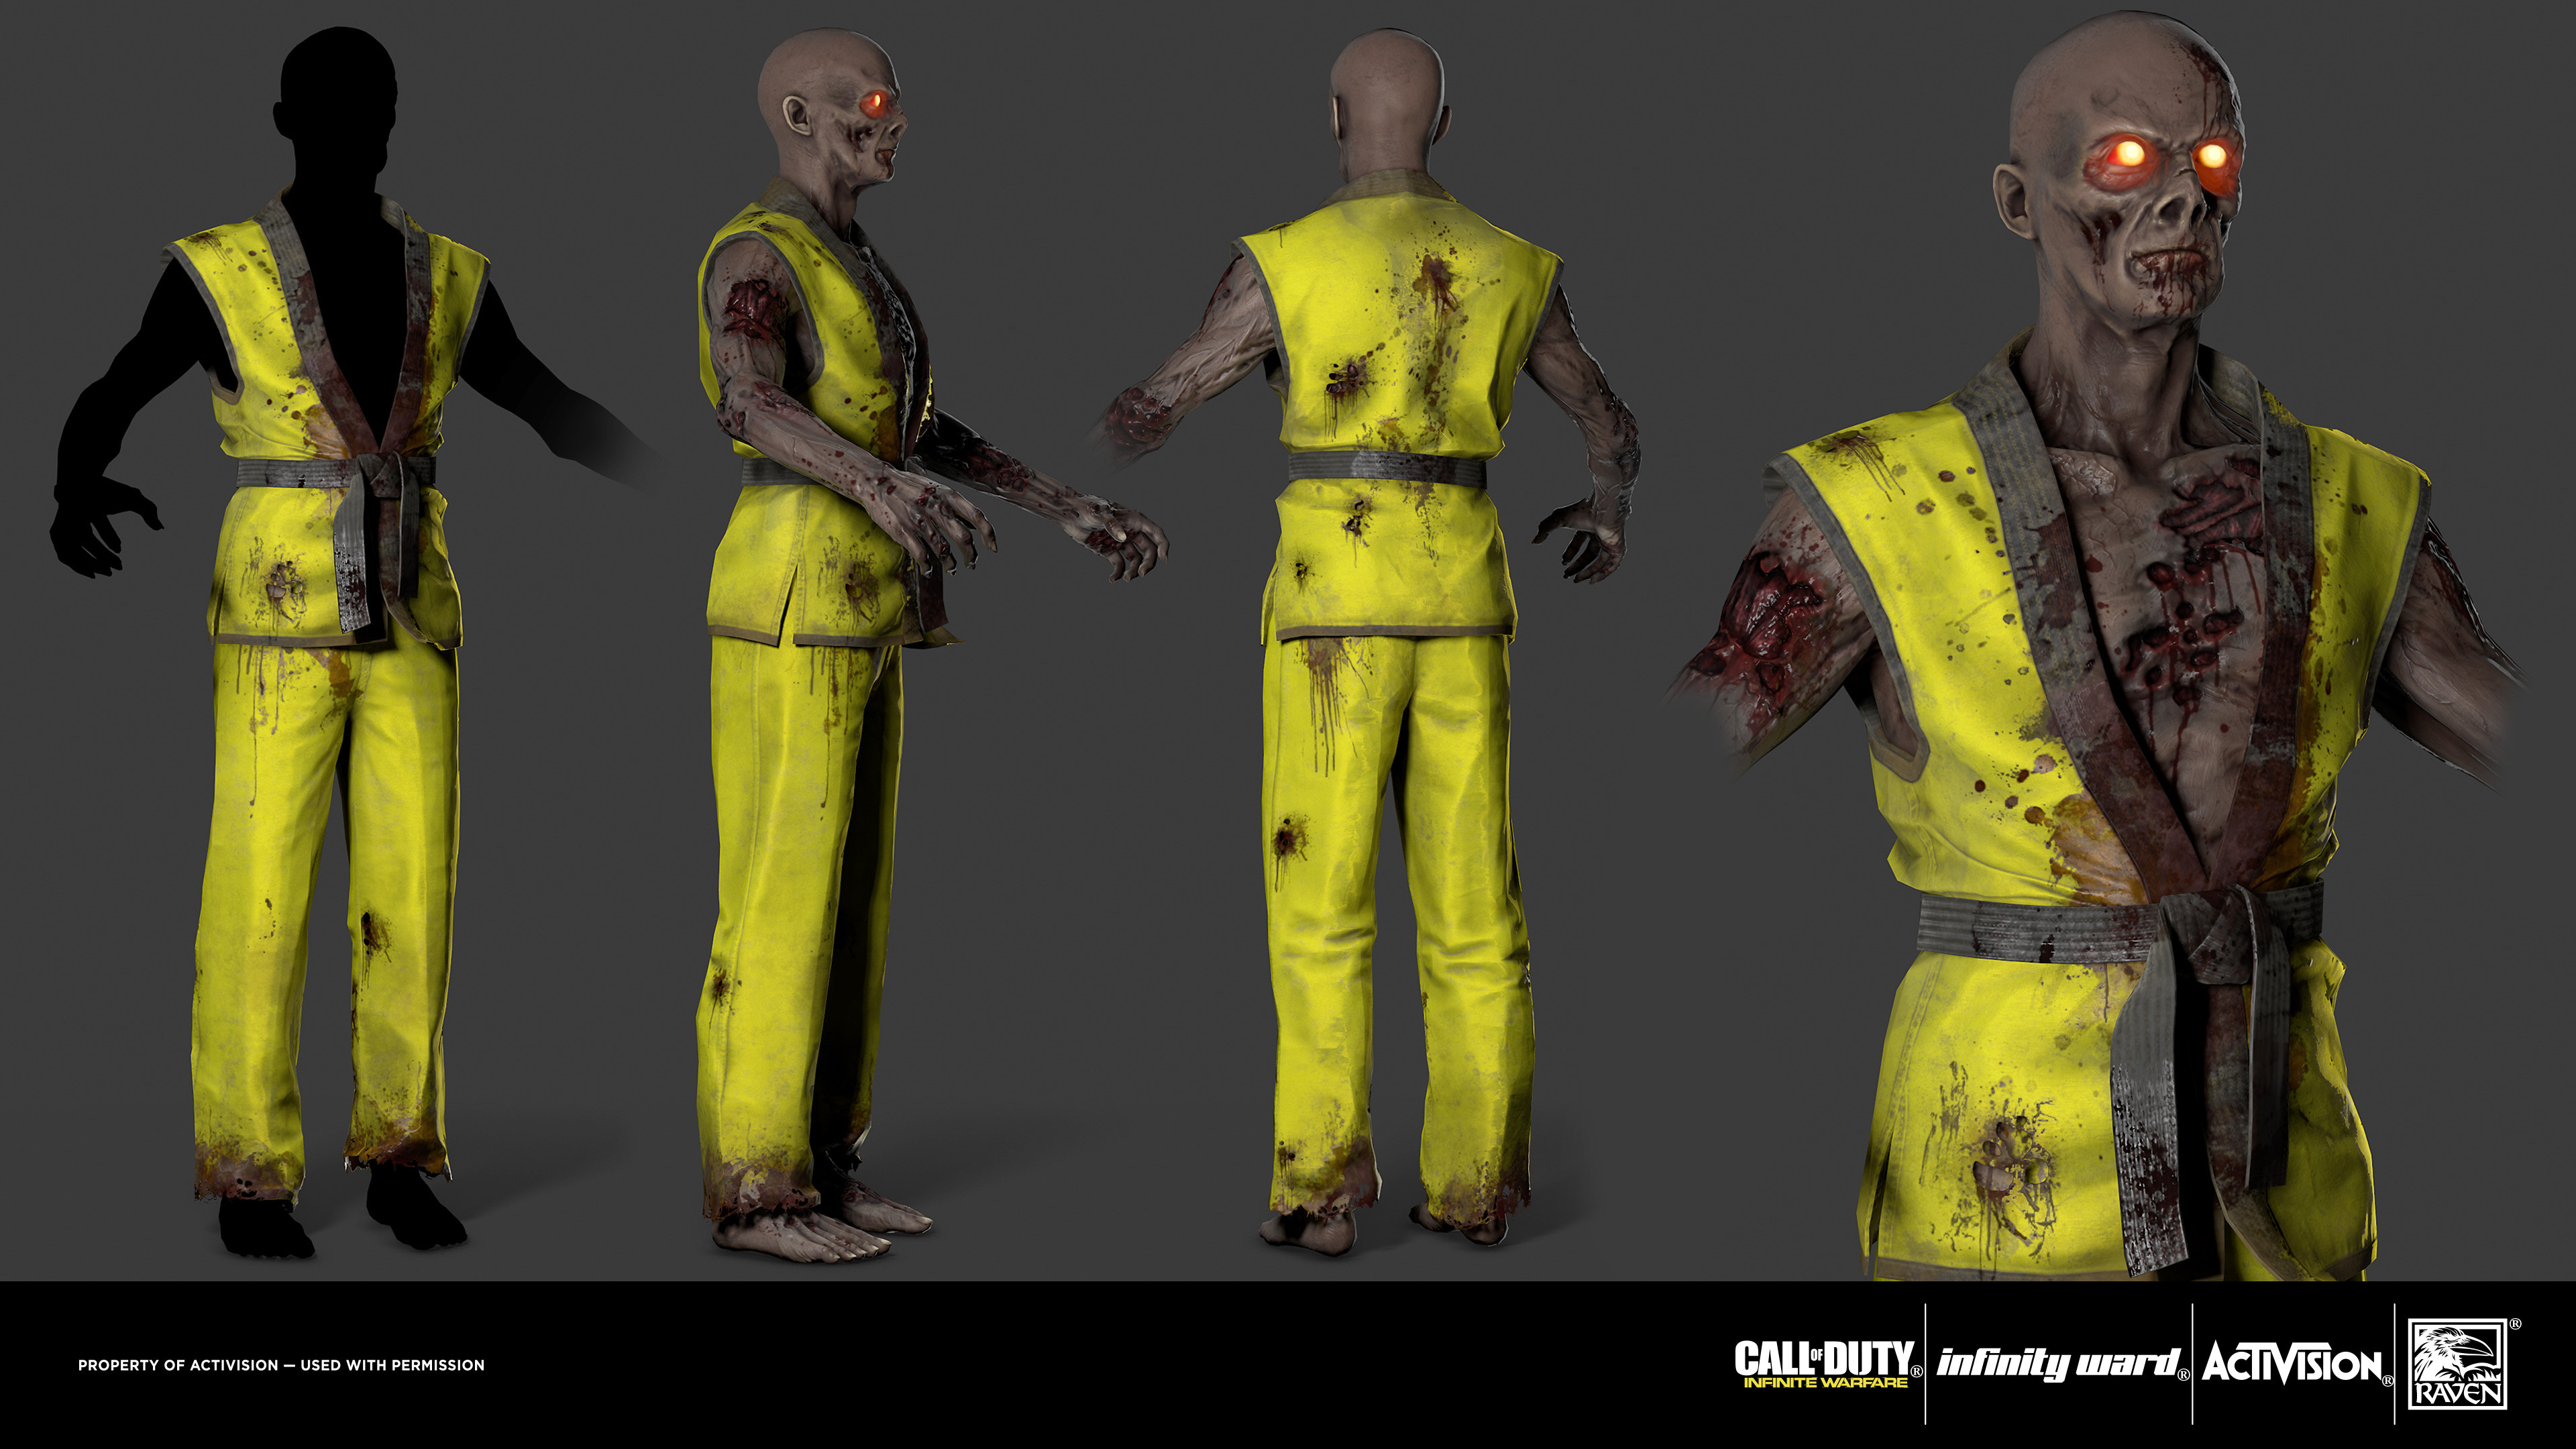 Karate zombie: SHAOLIN SHUFFLE. Game model - Responsible the the high poly, low poly, bakes and textures. 